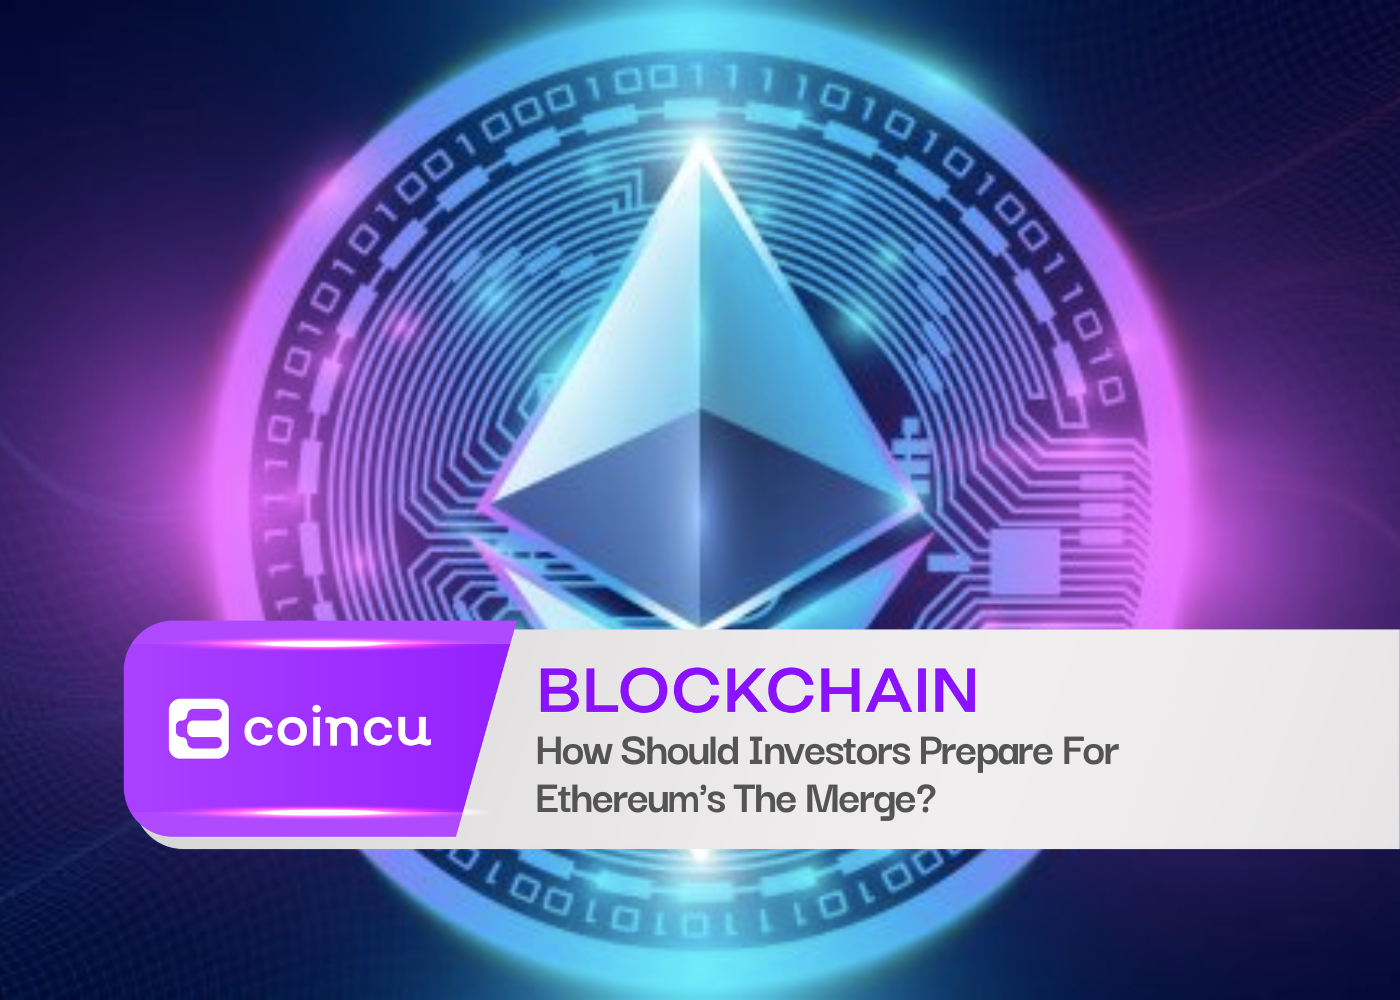 How Should Investors Prepare For Ethereum's The Merge?